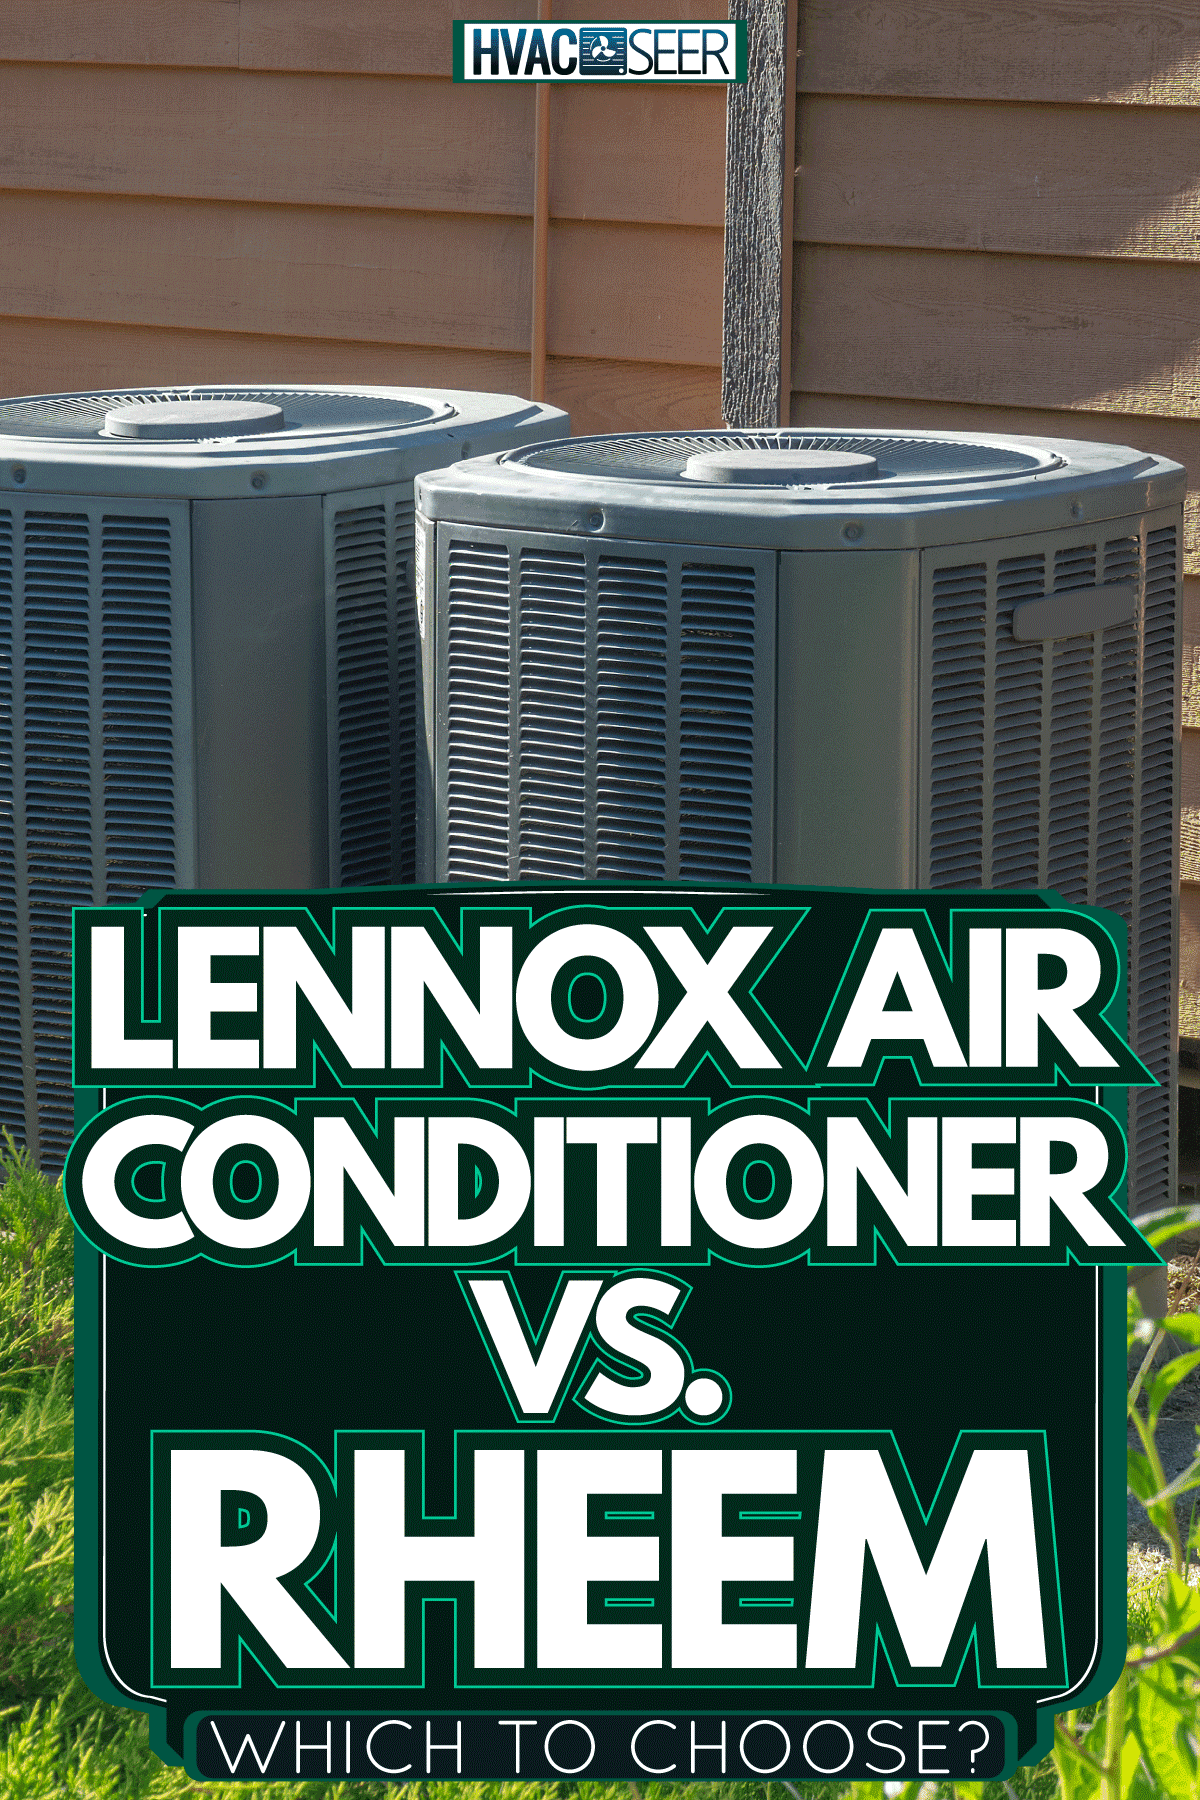 Gray Lennox air conditioning units outside the house, Lennox Air Conditioner Vs. Rheem: Which To Choose